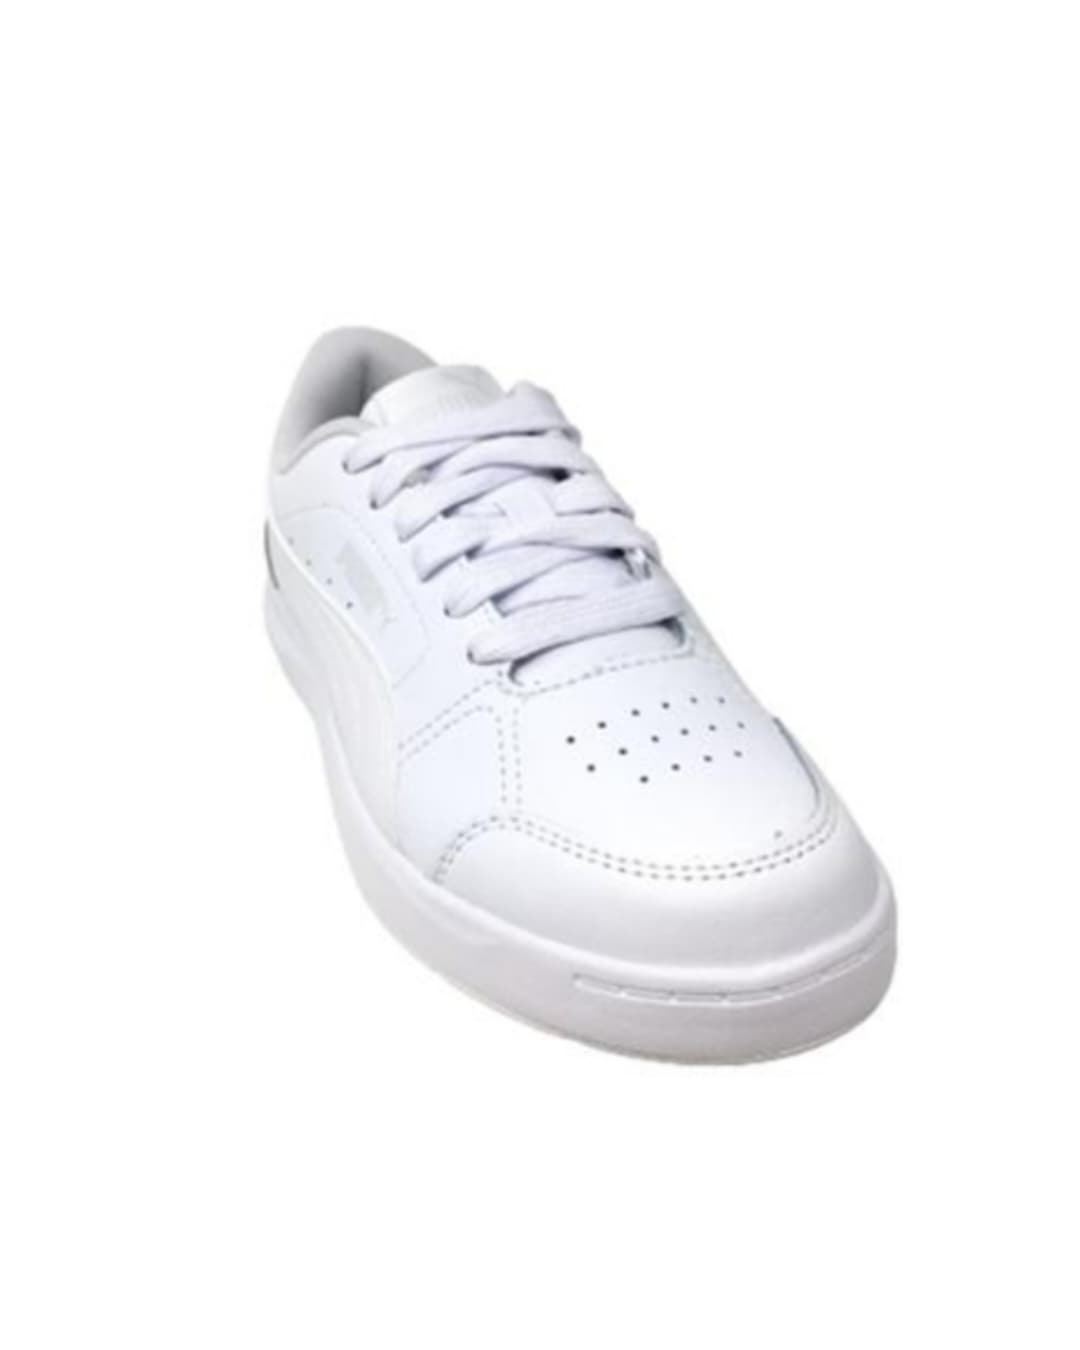 Puma Evolve Court Jr White Children's Sneakers with Lace - Image 4